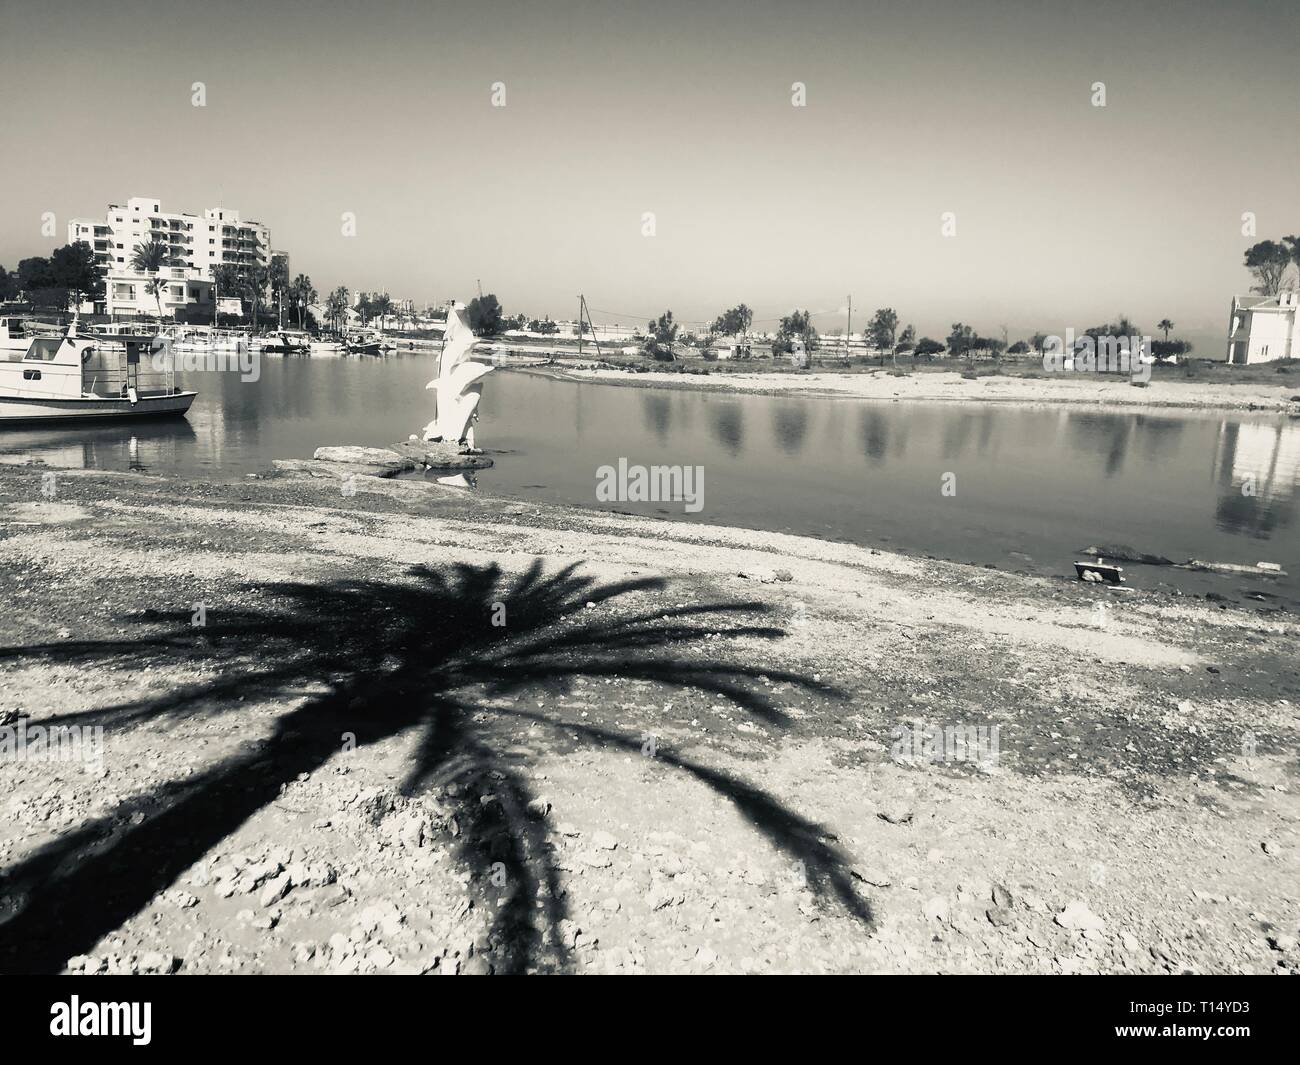 Famagusta (Varosha) is an abandoned Cypriot city of Famagusta. Before the 1974 Turkish invasion of Cyprus, it was the modern tourist area of the city. Stock Photo